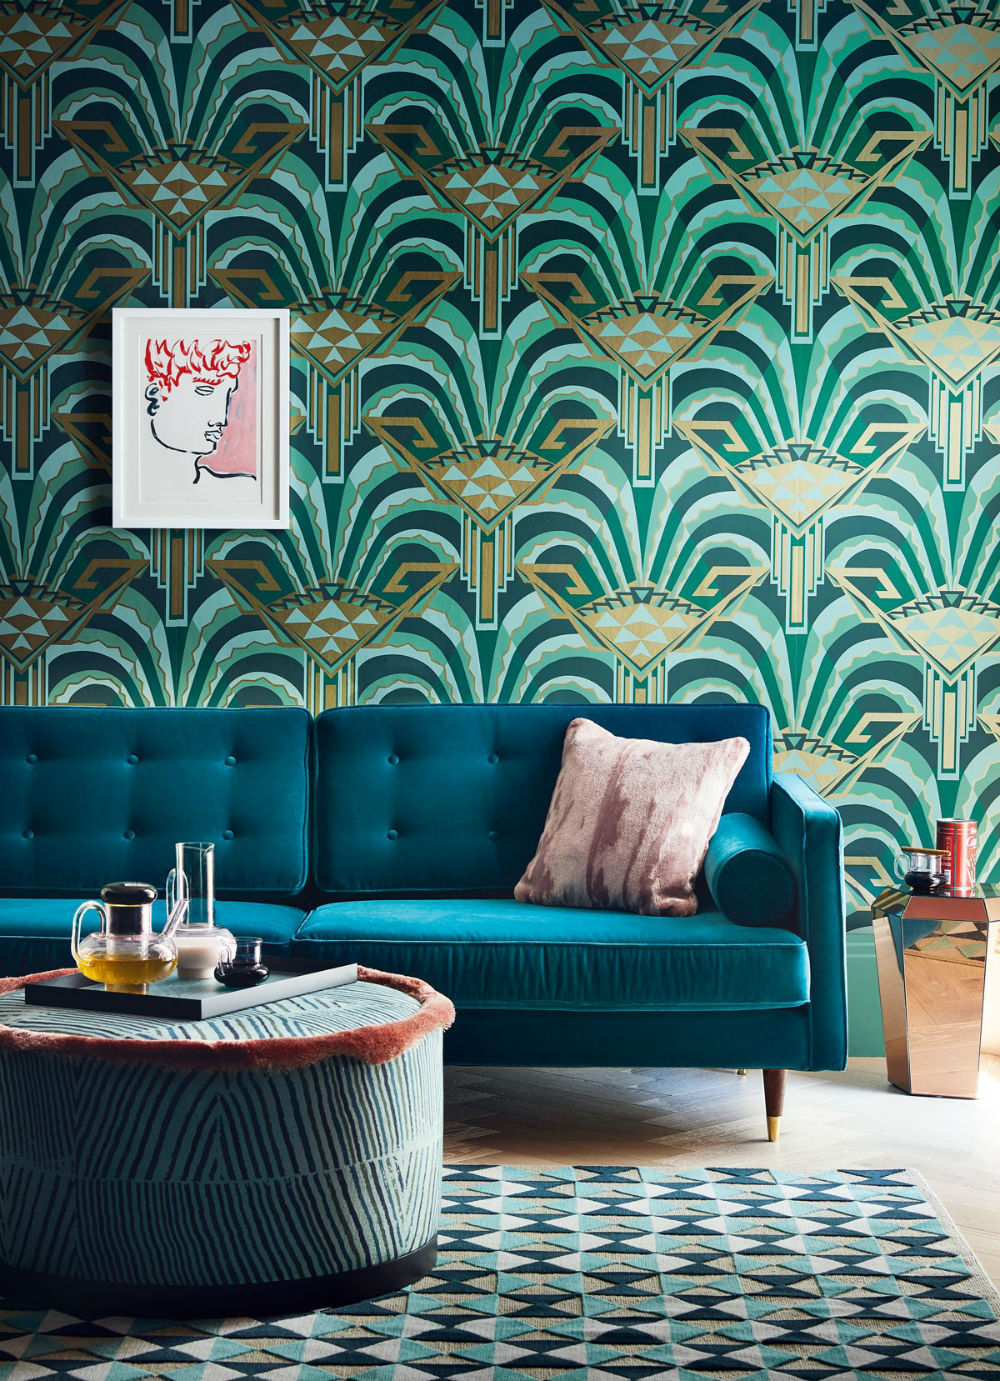 How to bring stylish Art Deco into your home interior